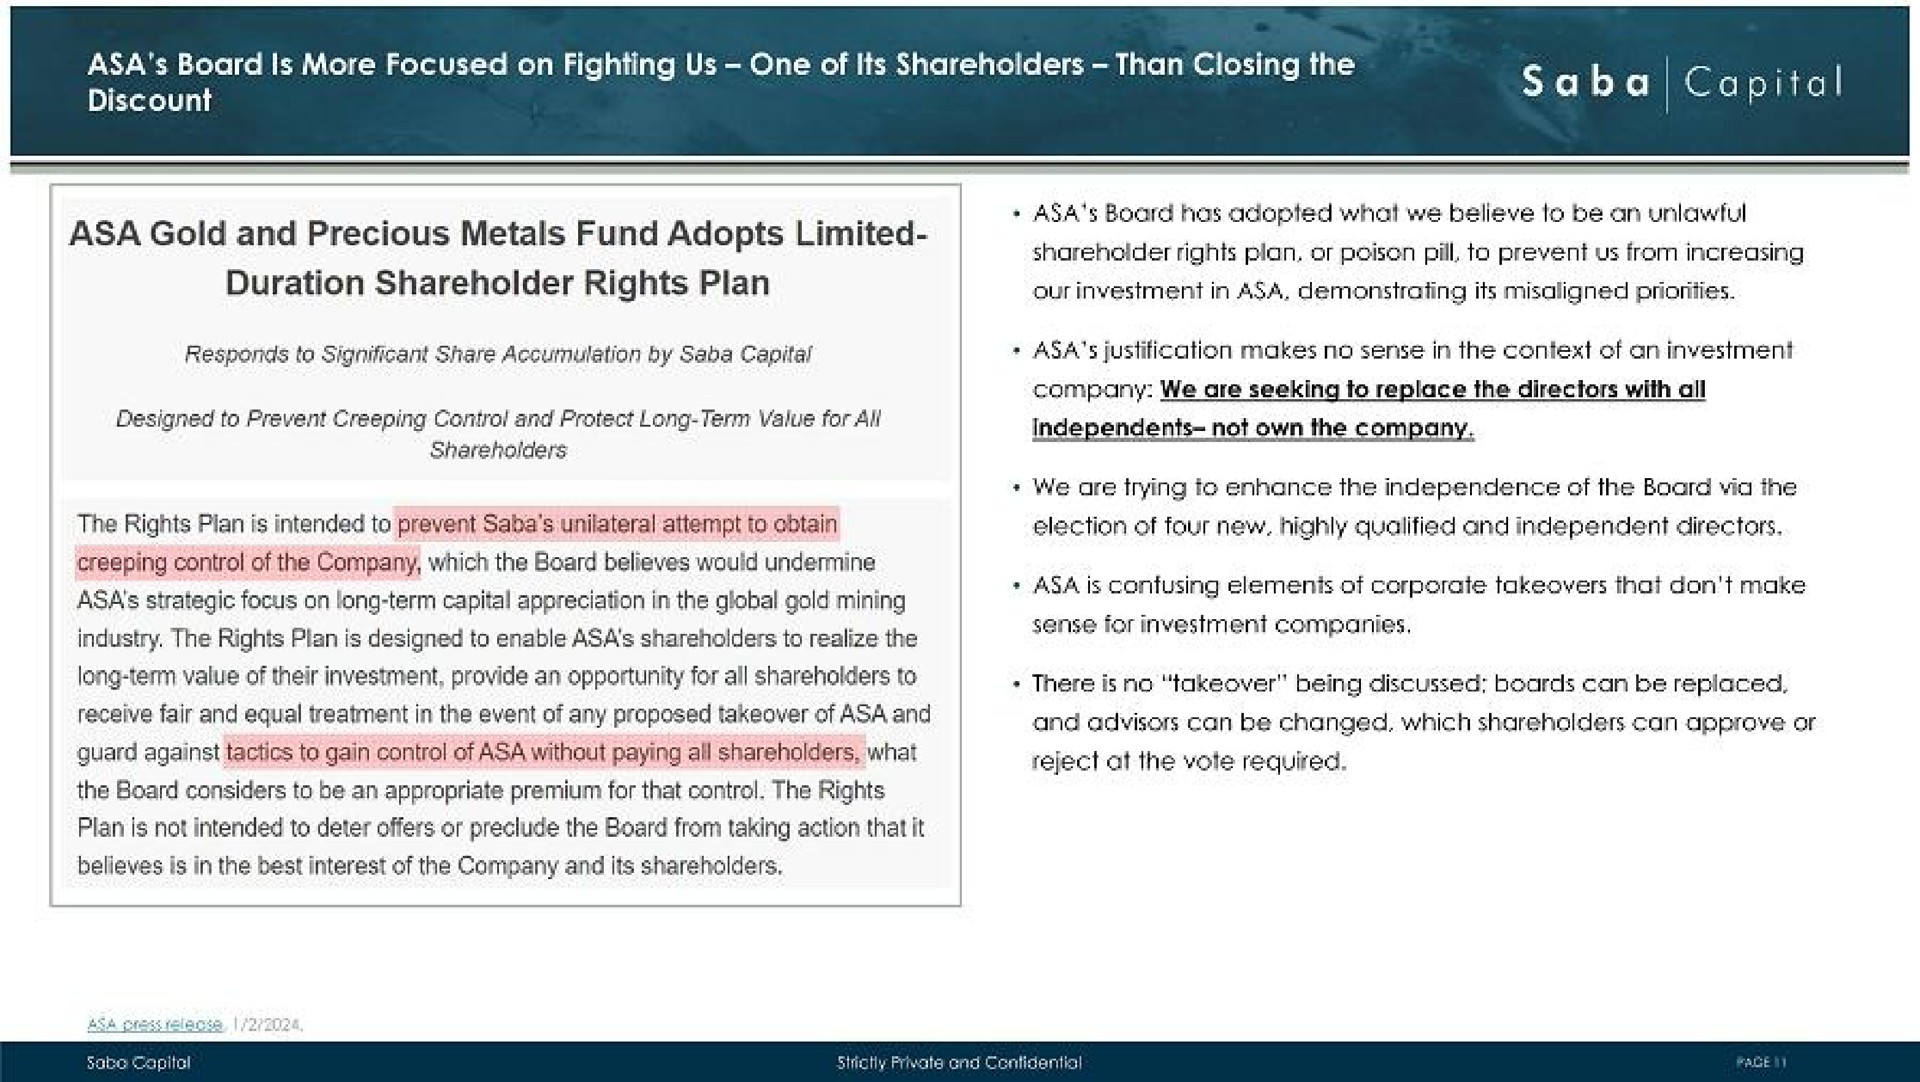 gold and precious metals fund adopts limited guard against tactics to gain control of without paying all shareholders what reject at the vote required | Saba Capital Management